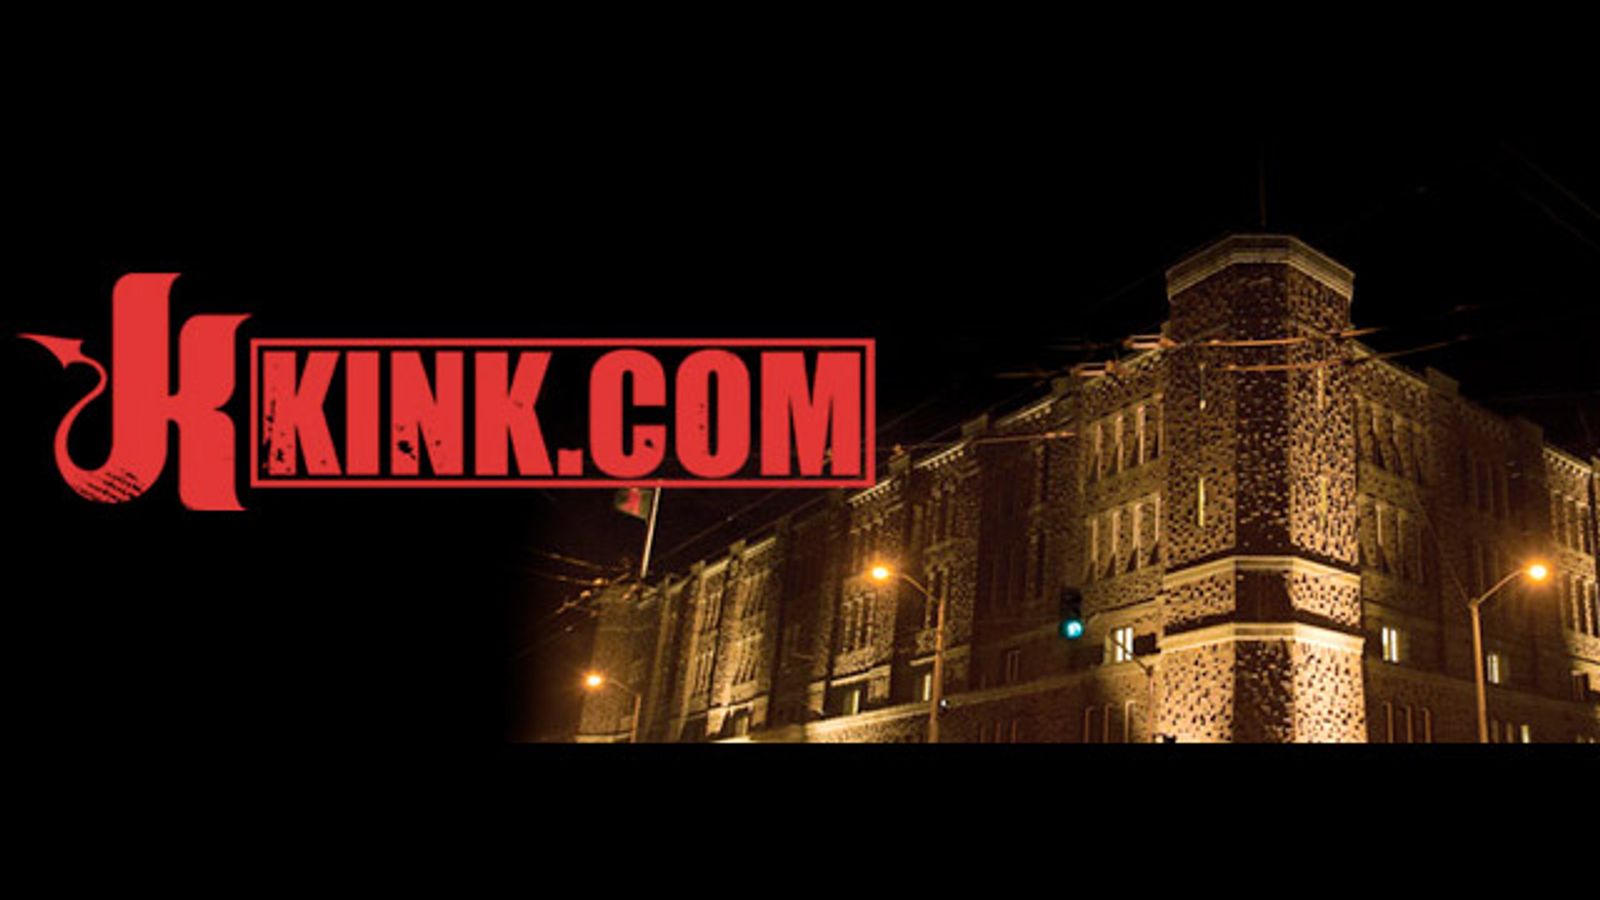 Kink.com Contest GIves Fans a Chance to Script a Shoot